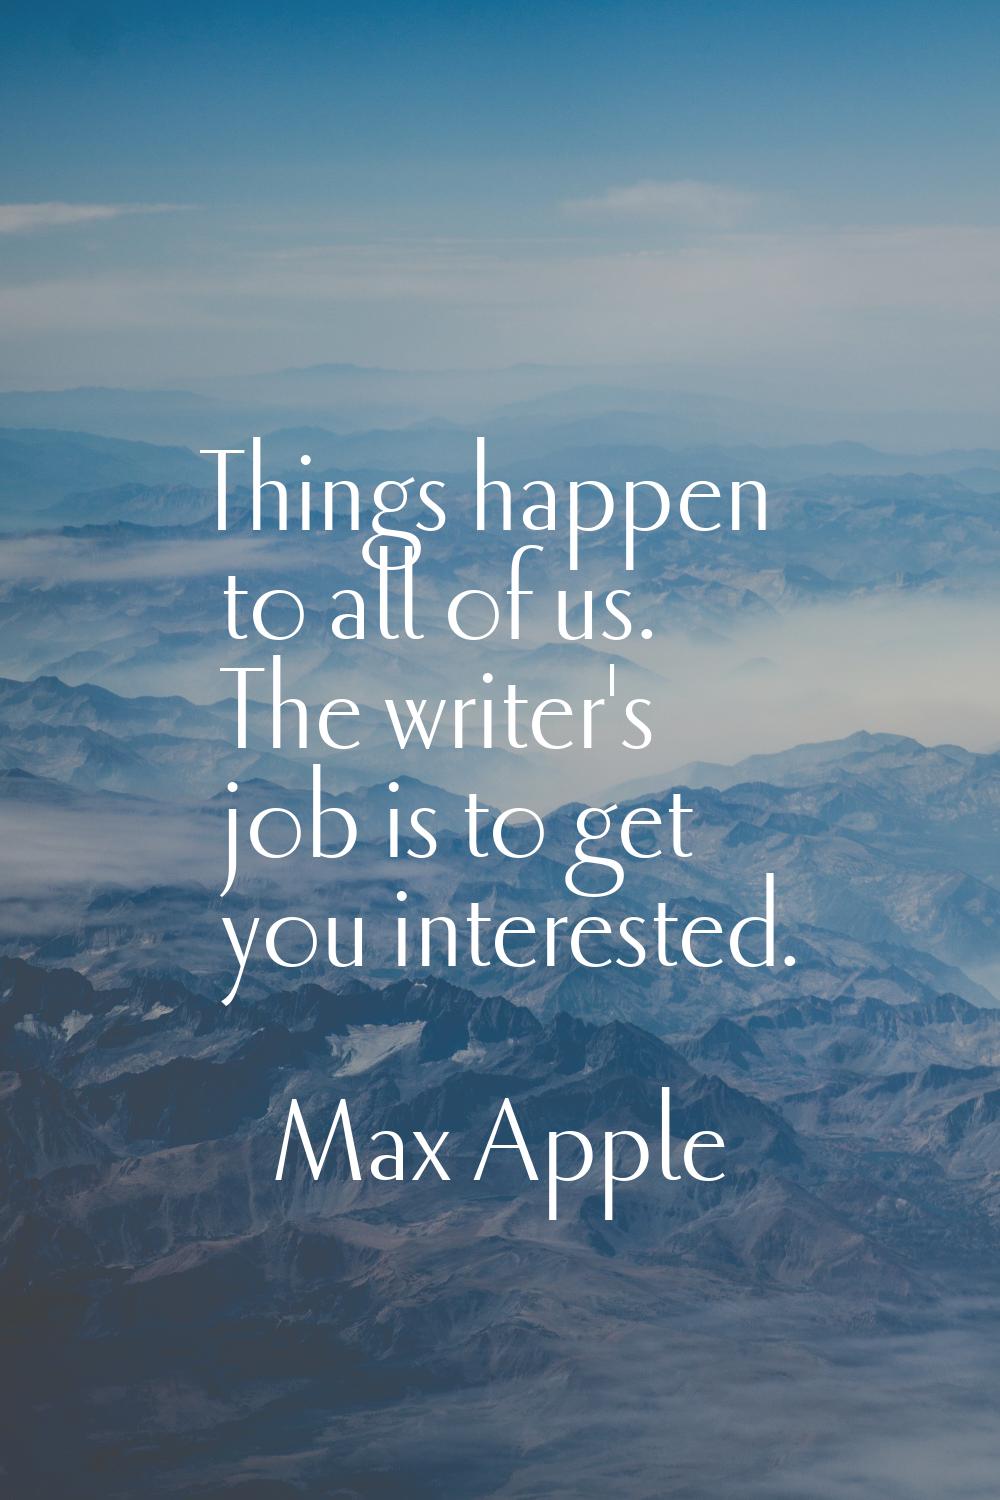 Things happen to all of us. The writer's job is to get you interested.